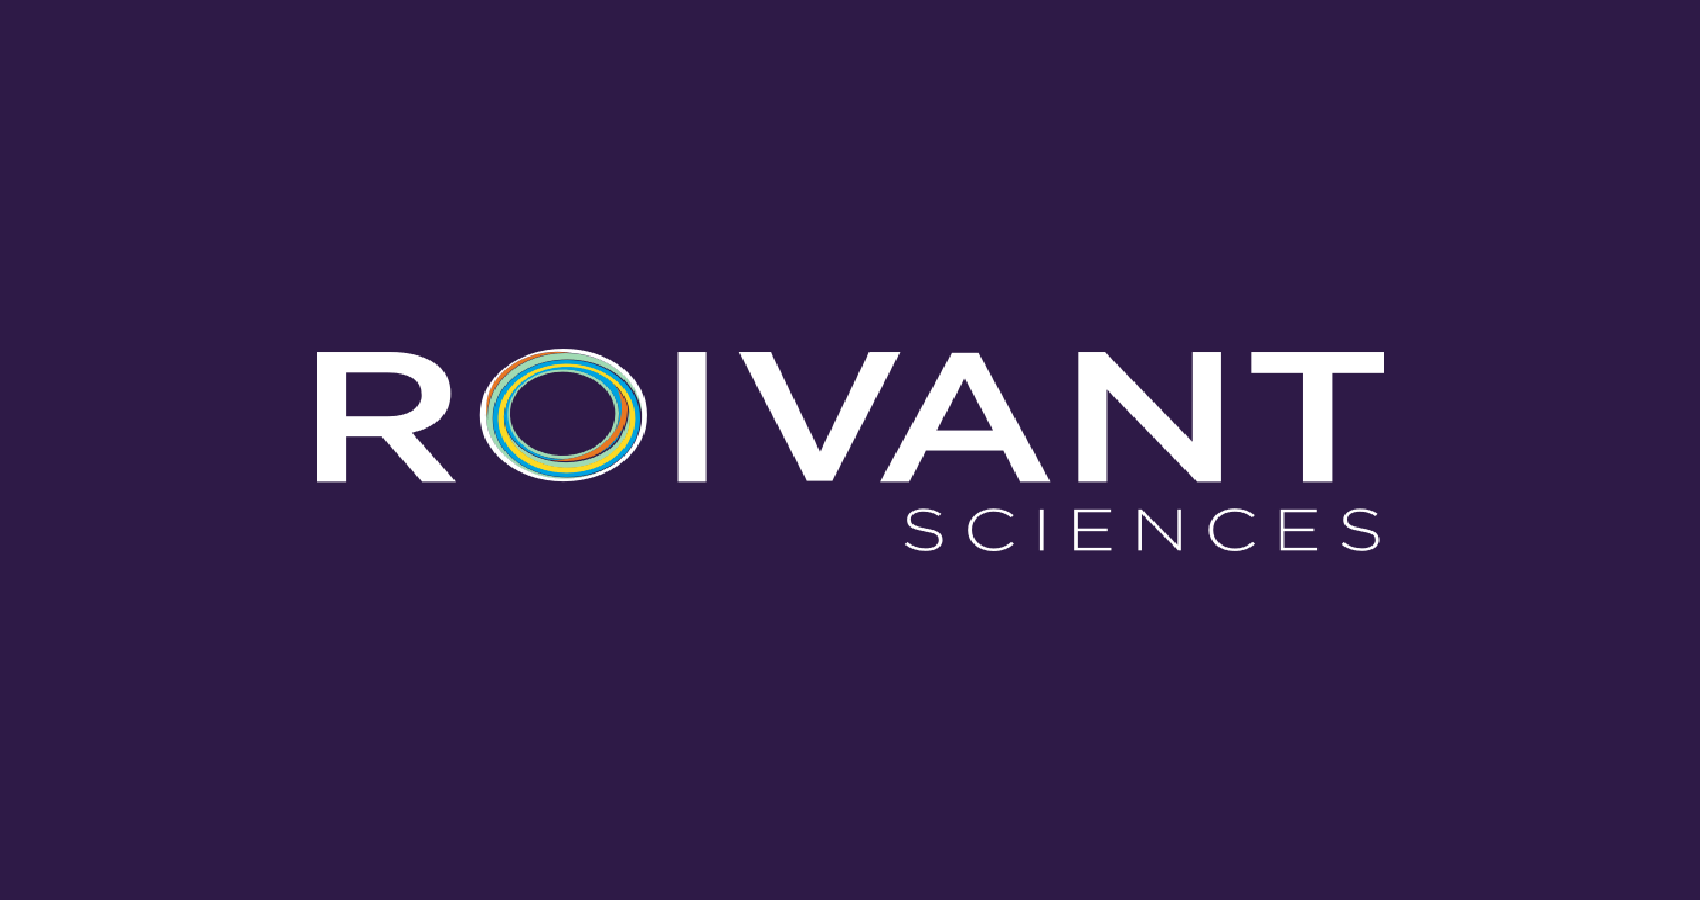 Roivant Sciences & MAAC to Combine and Create Publicly Traded Leader in Biopharma and Health Technology